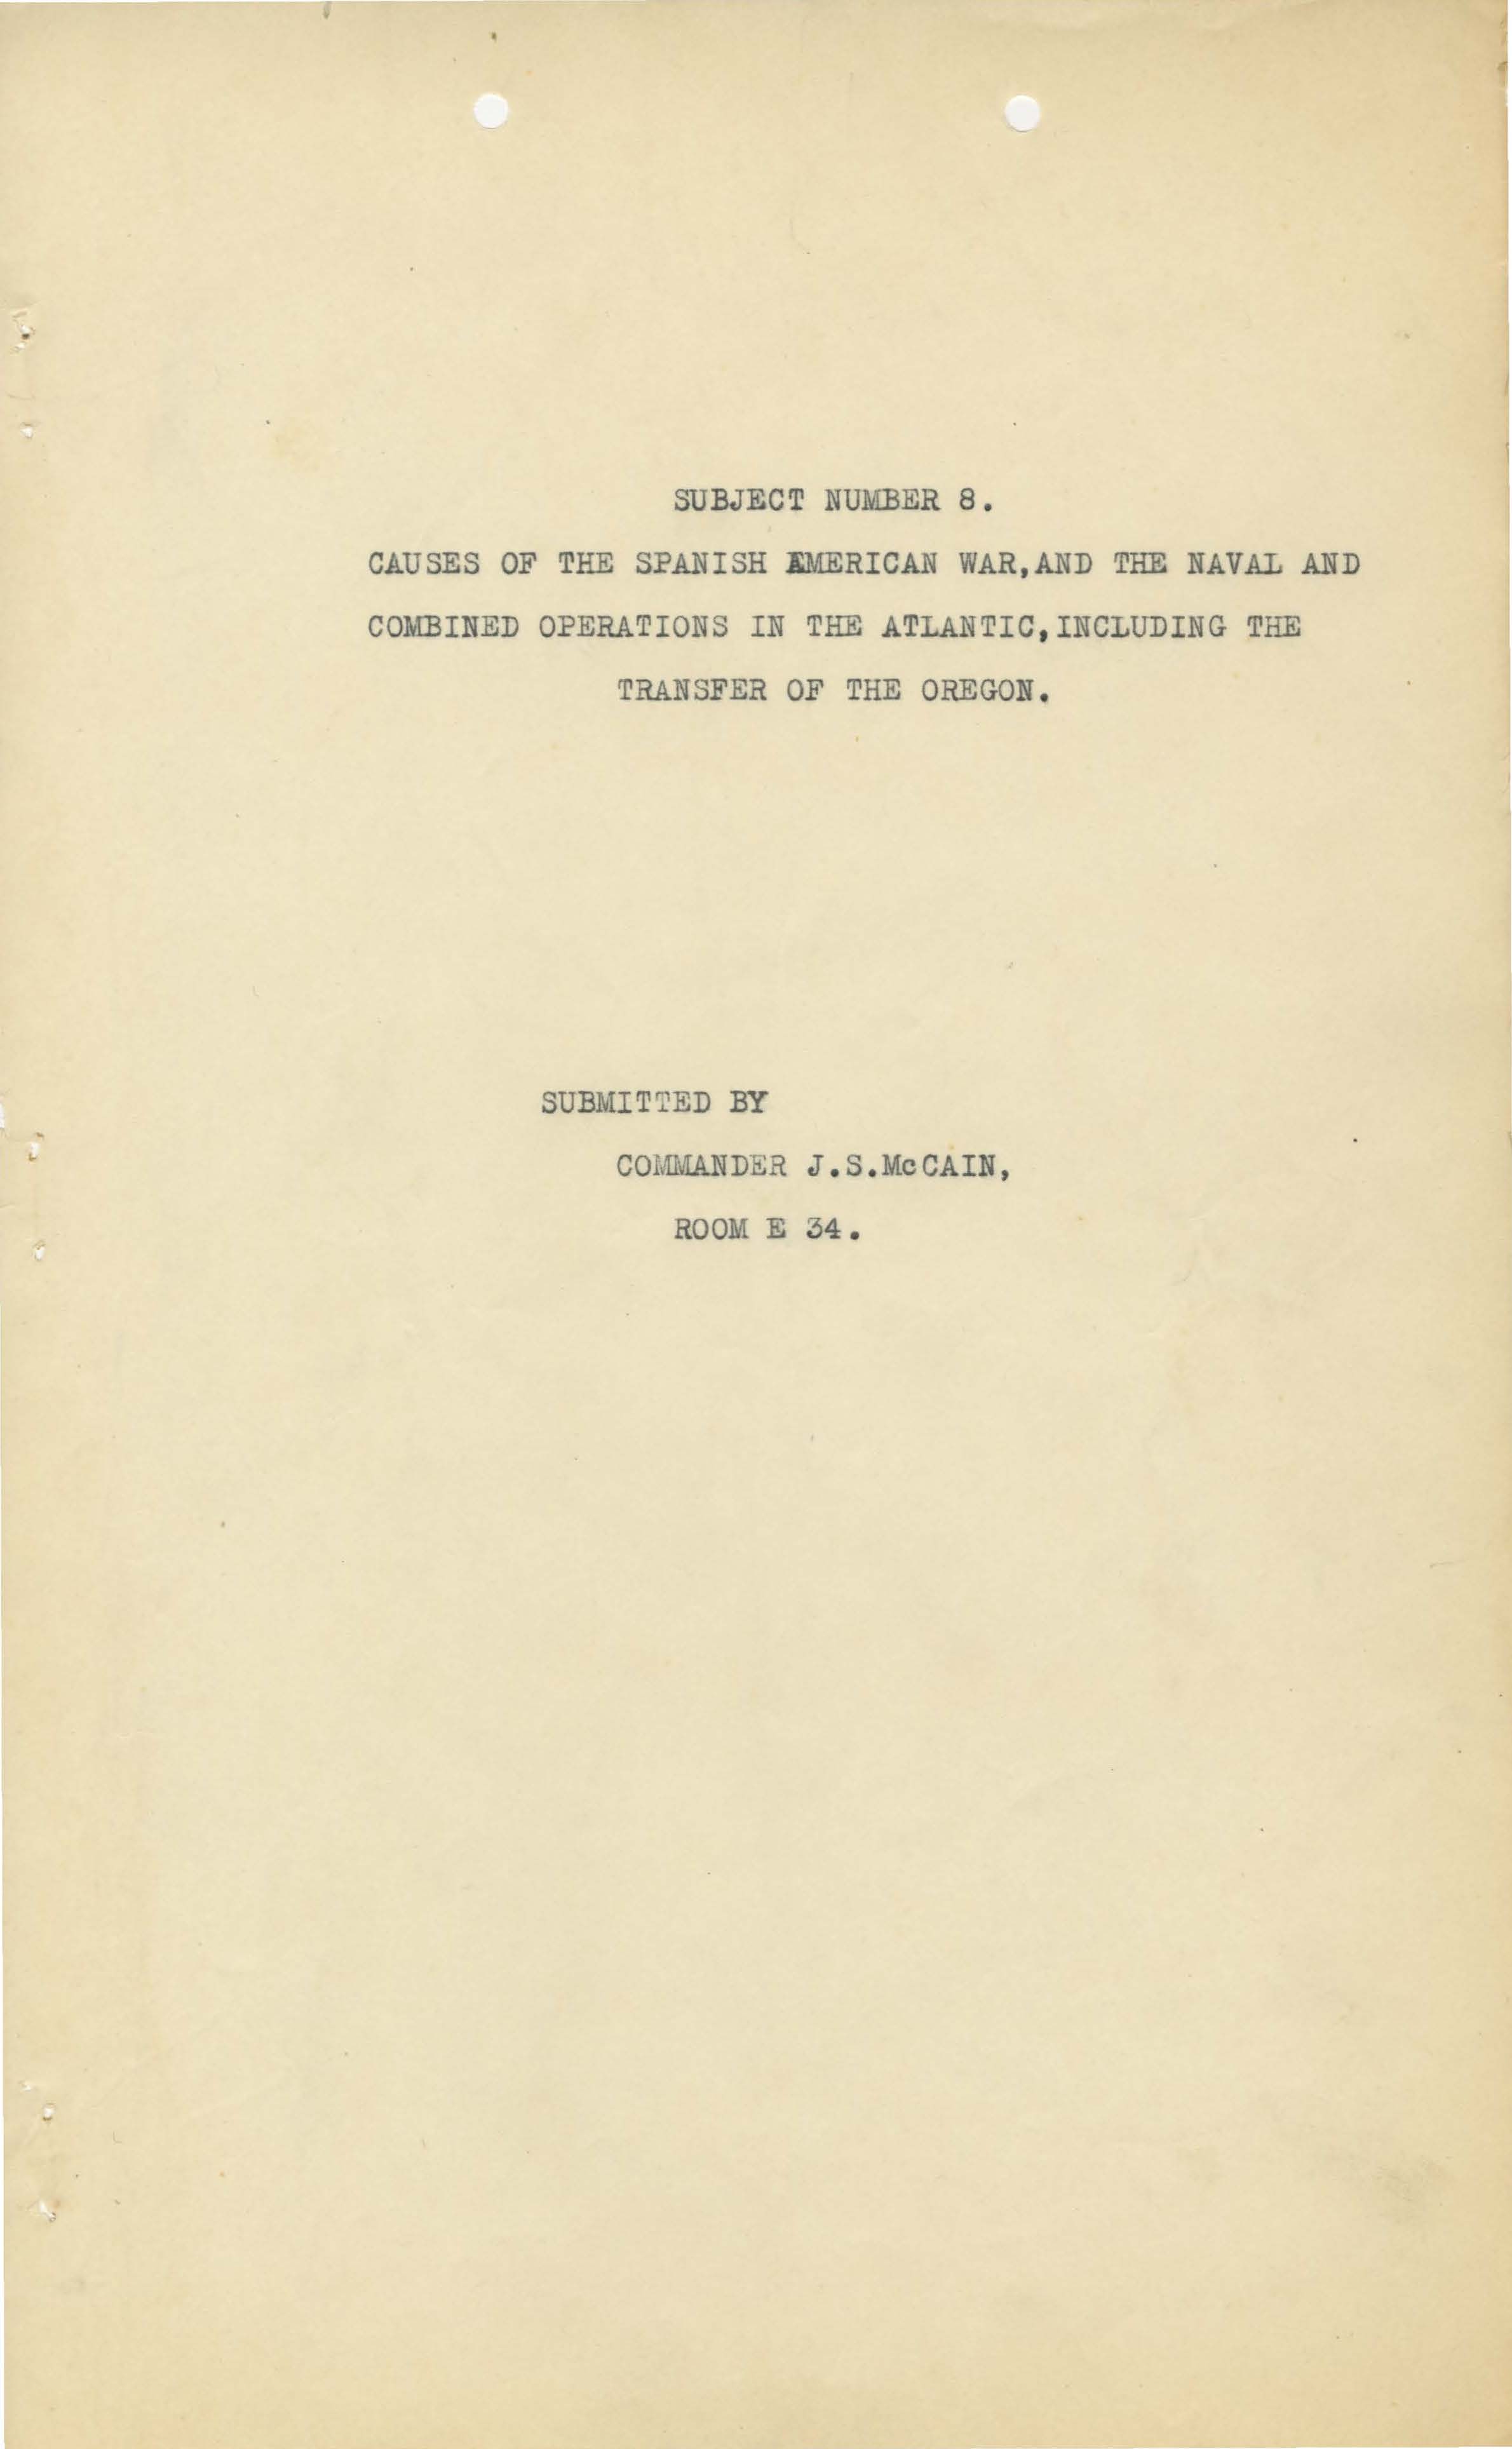 Causes of the Spanish American War, and the Naval and Combined Operations in the Atlantic, Including the Transfer of the Oregon, J.S. McCain